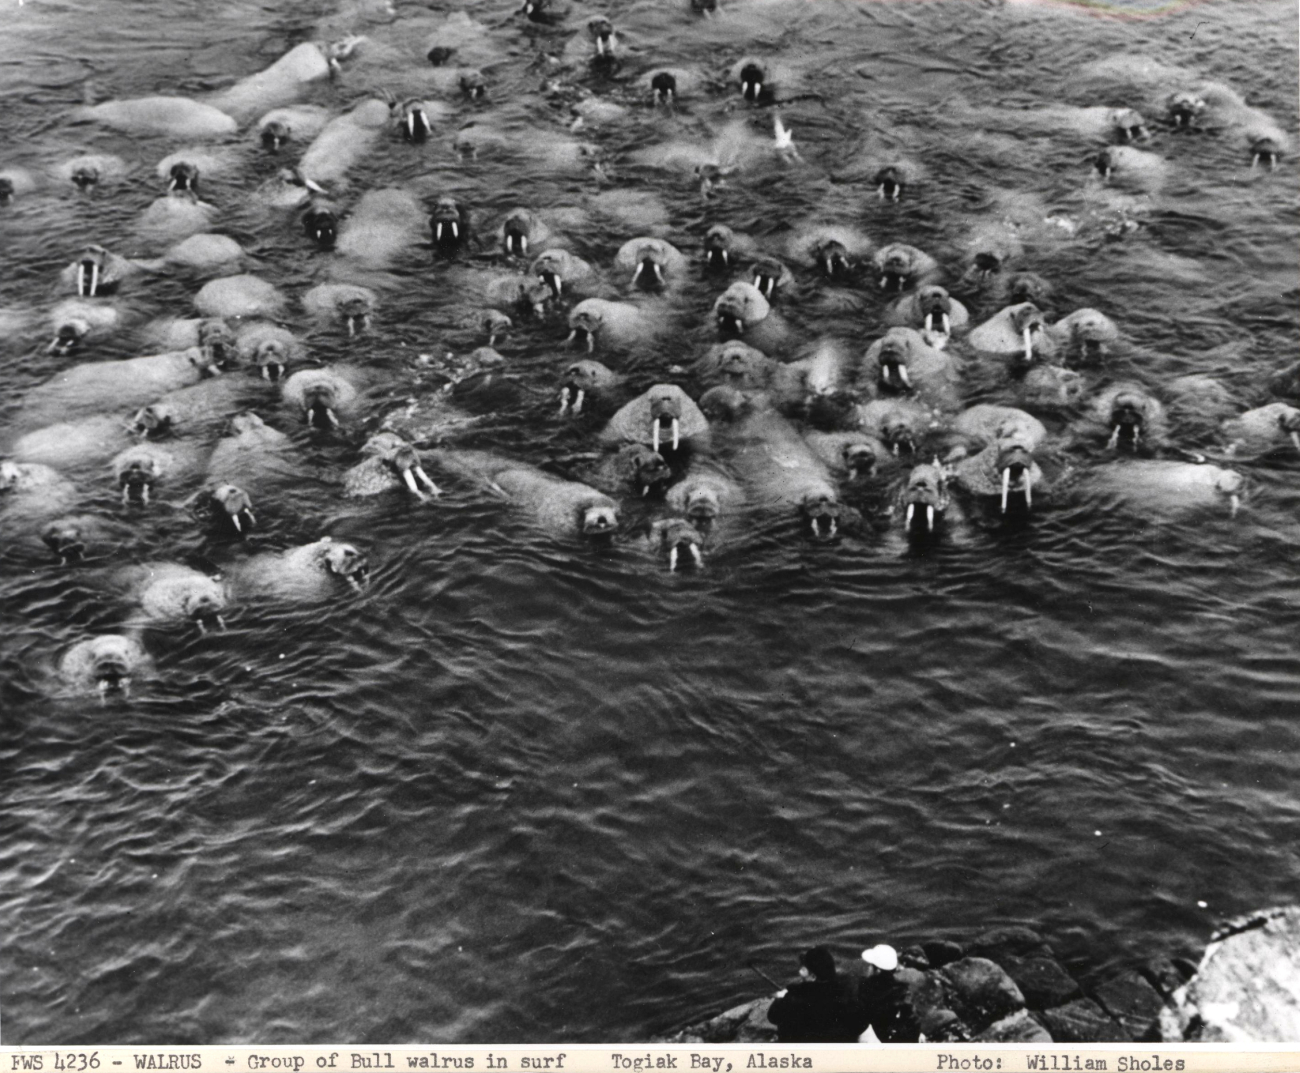 Group of bull walrus in the water with fisheries observers on rocks